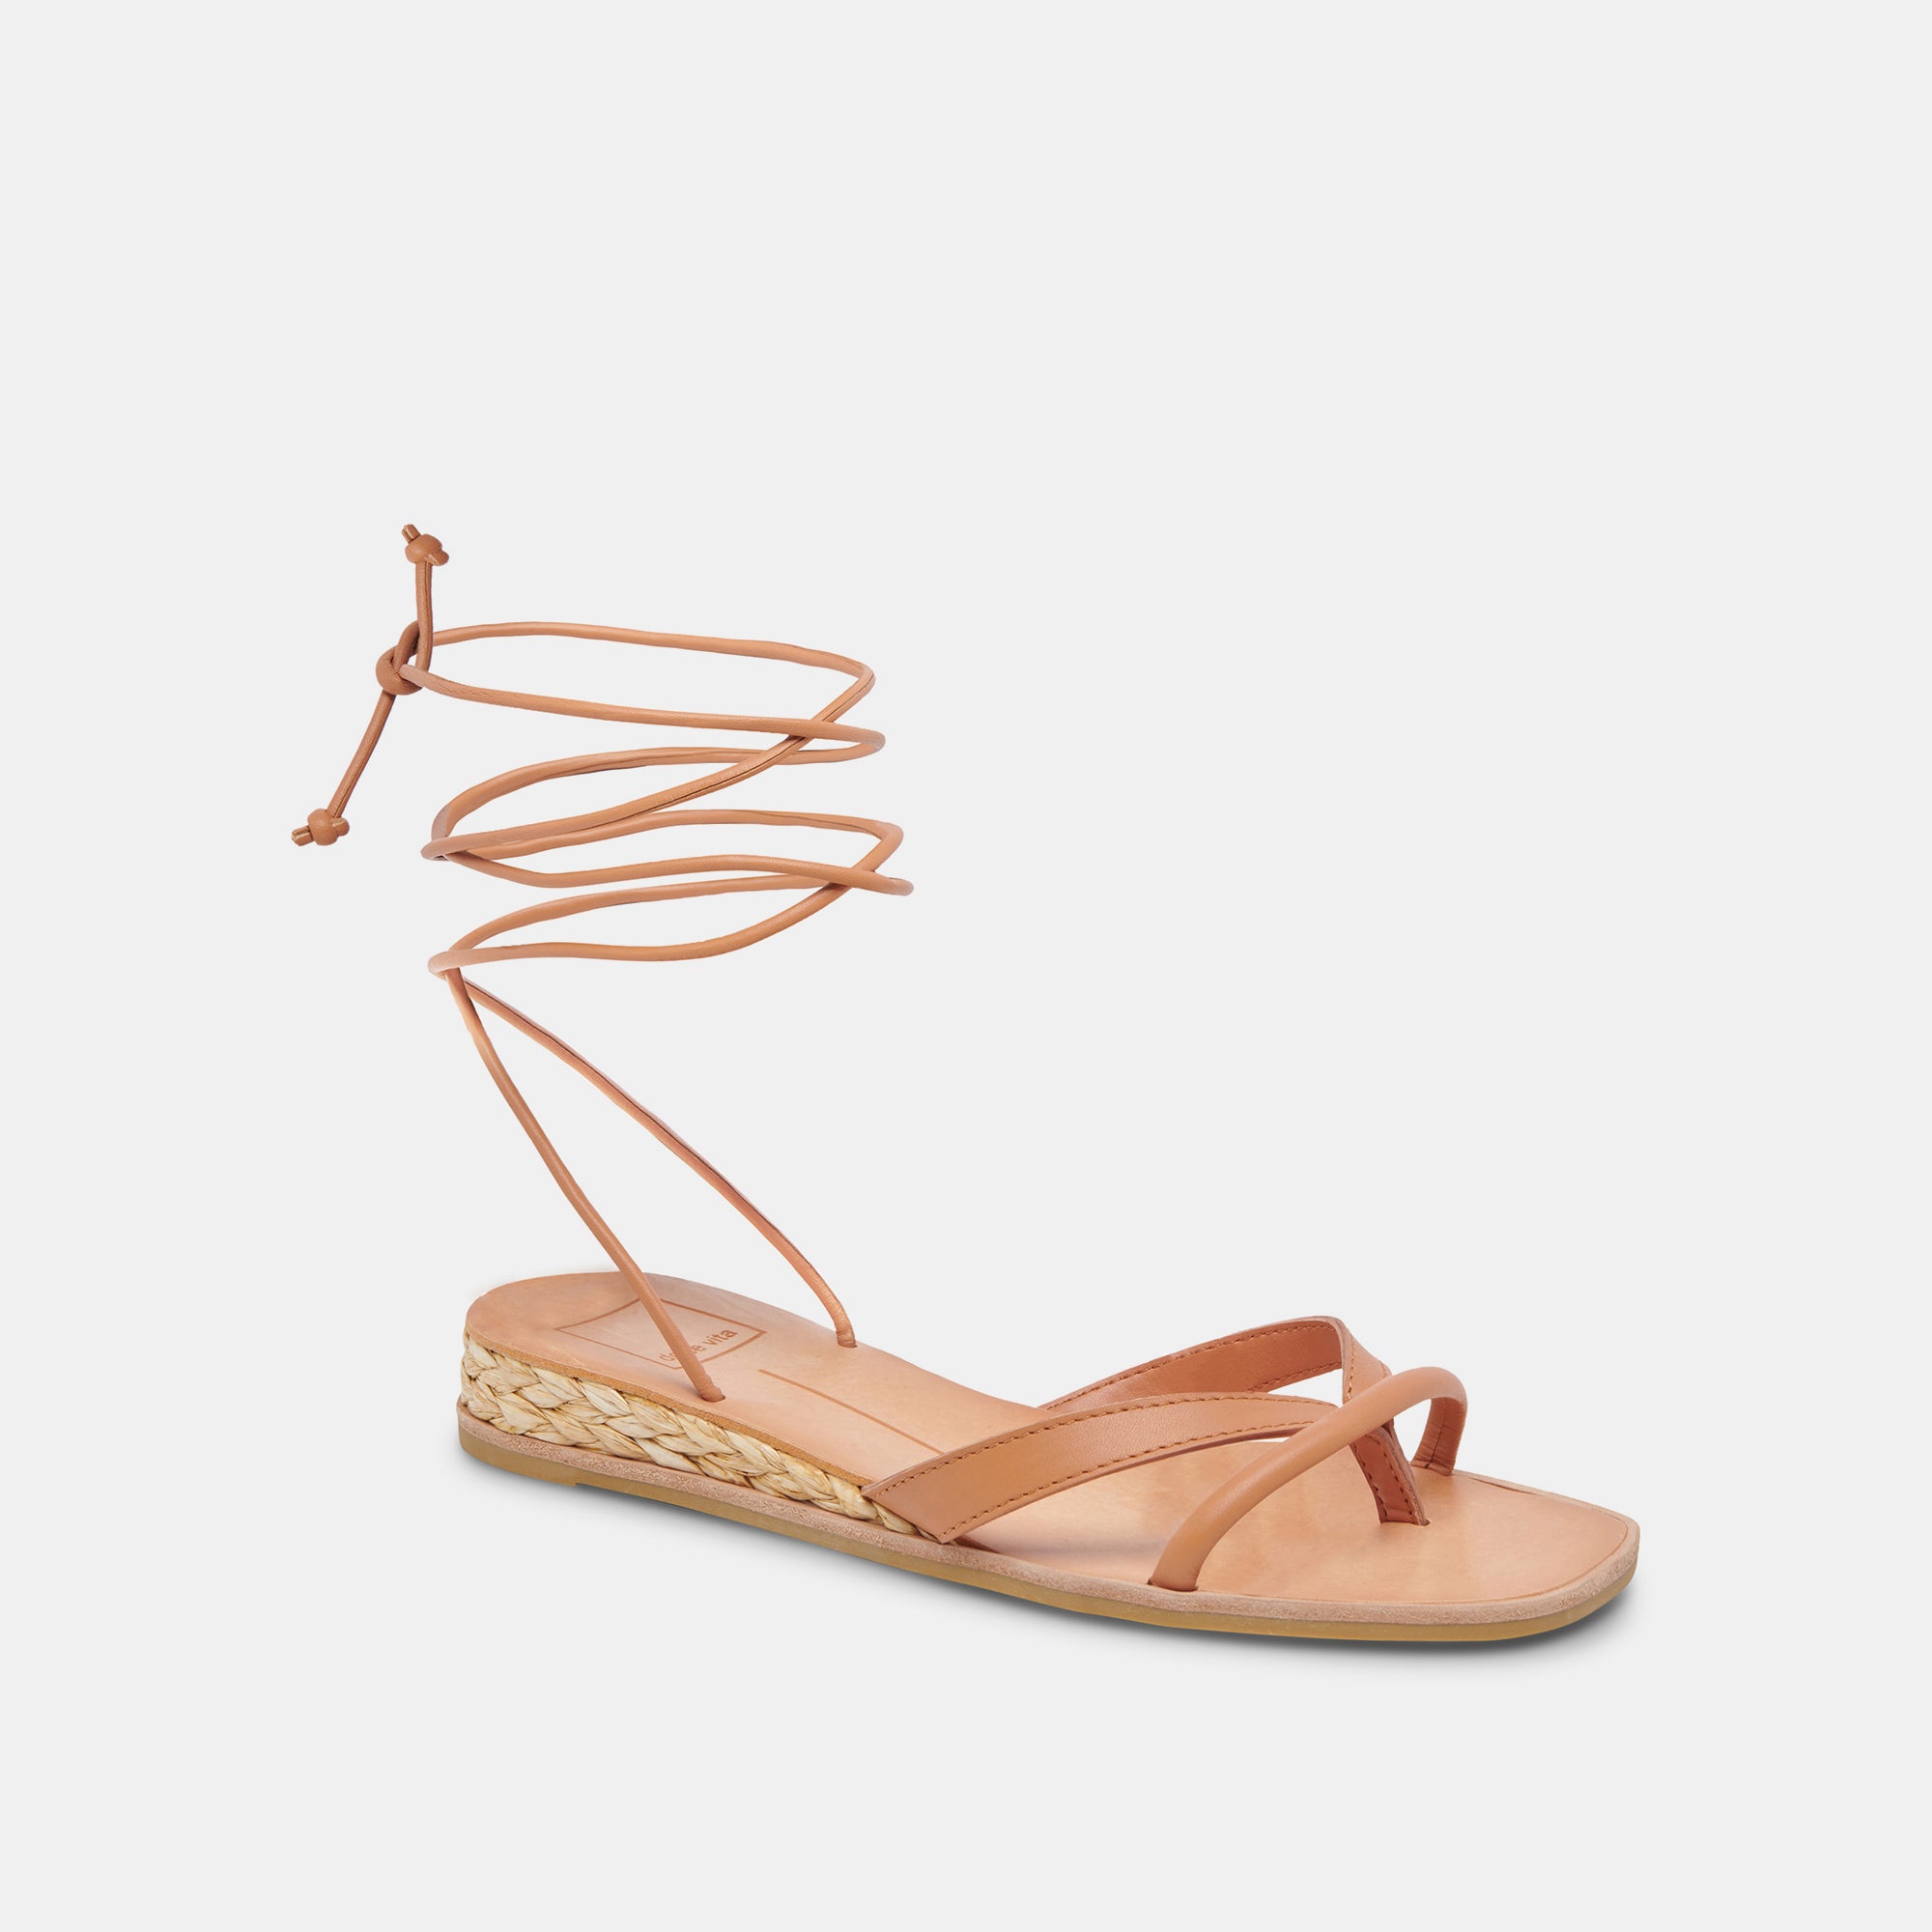 Sandals with straps in cognac leather | Jonak